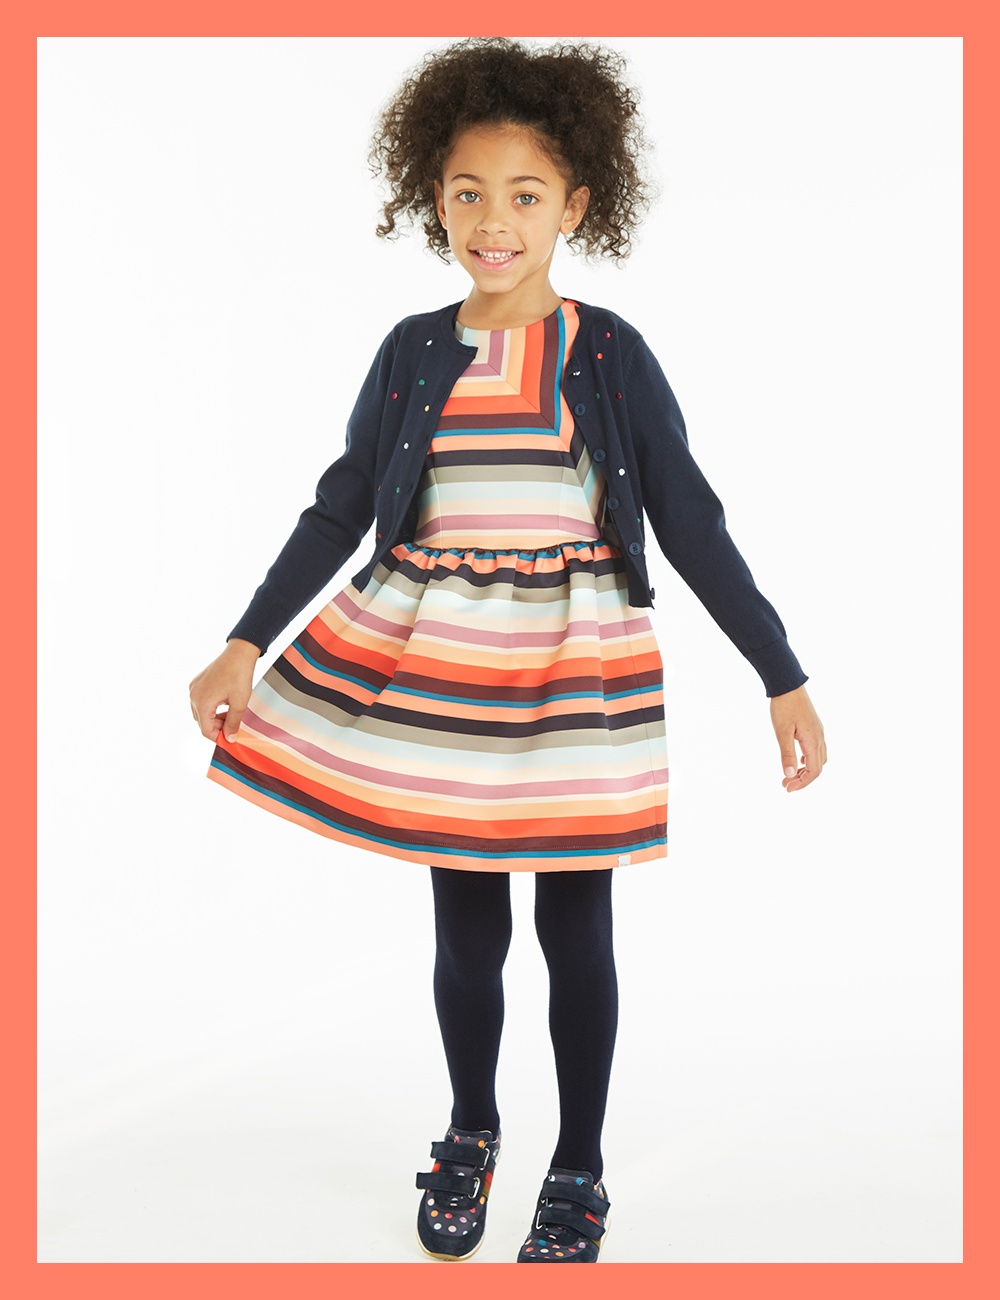 Paul Smith Junior Collection Full Of Designer Childrenswear Across All Ages